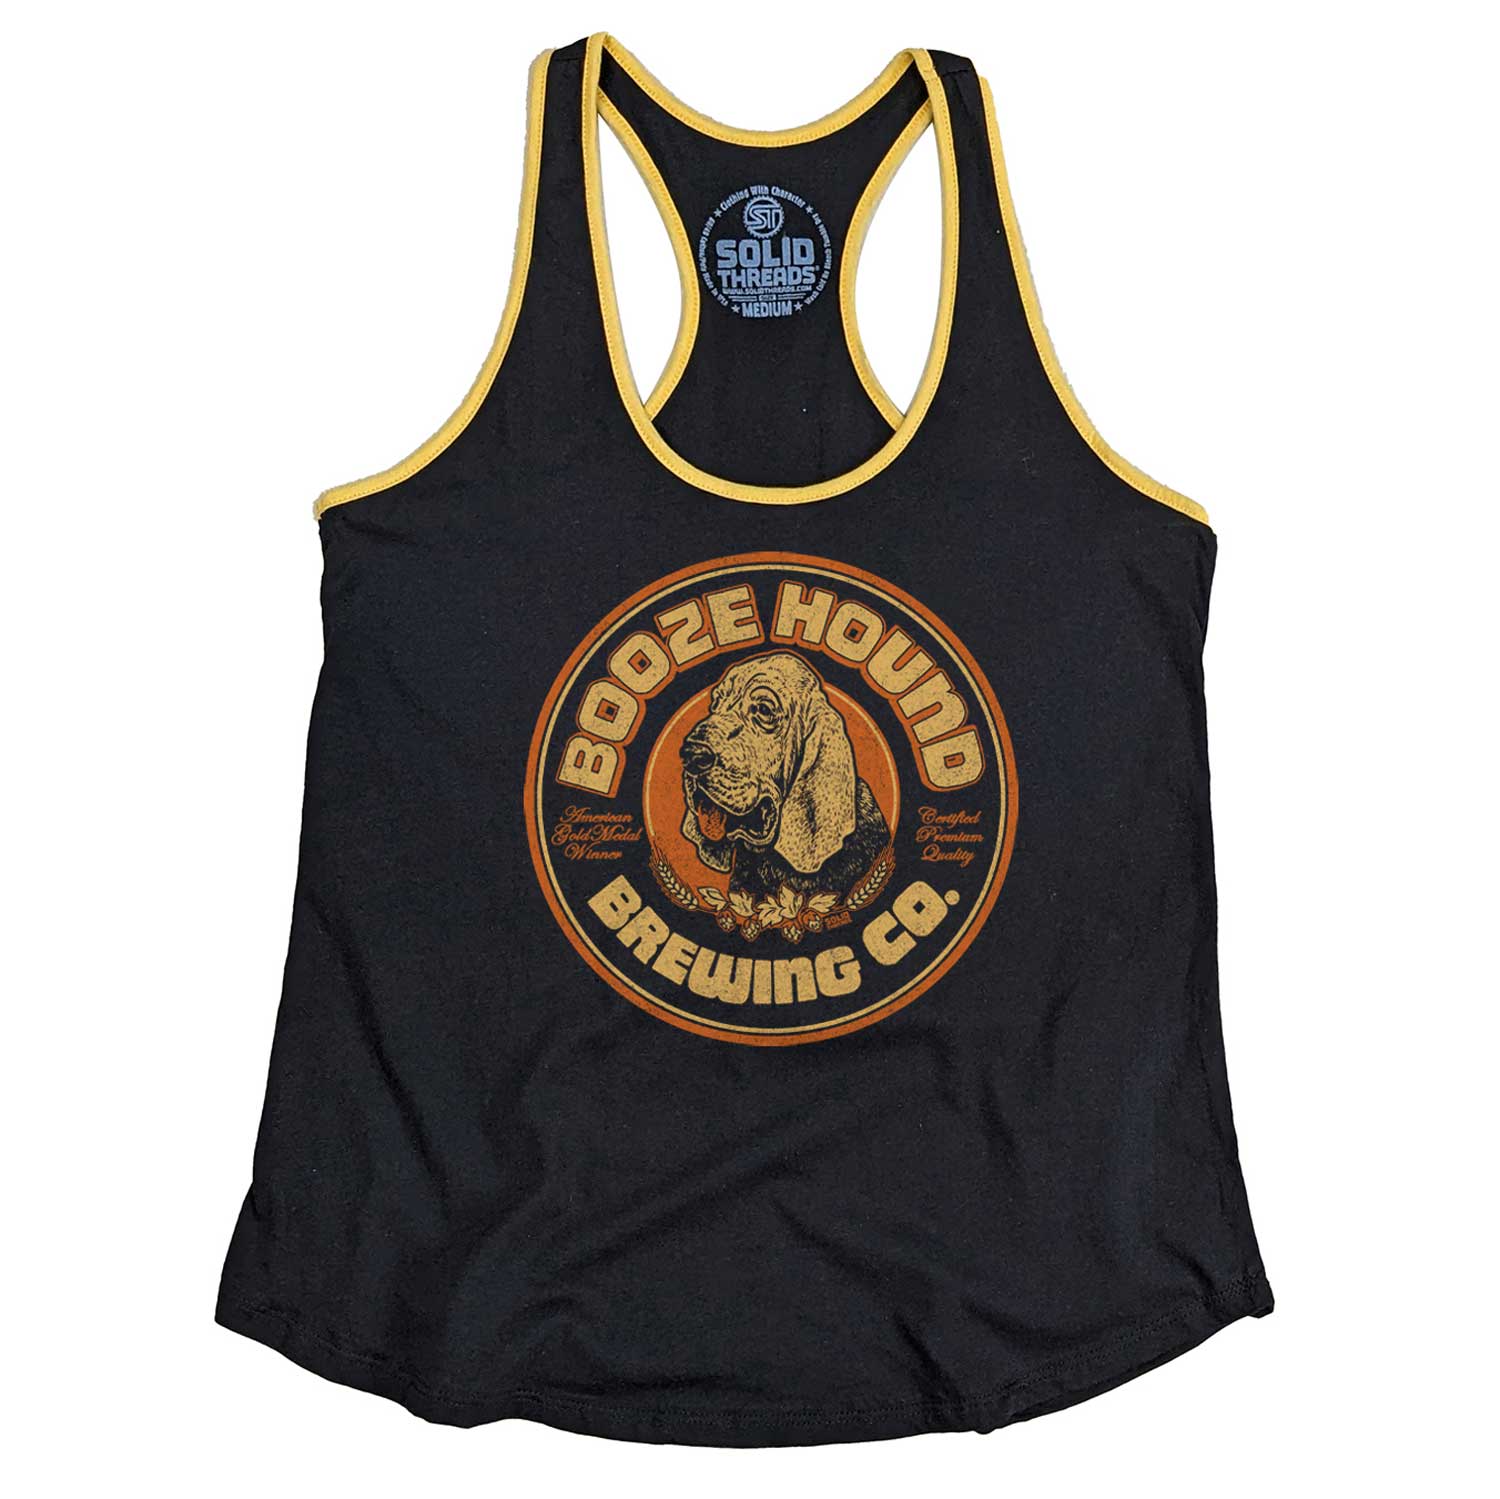 Women's Boozehound Brewing Co. Vintage Graphic Tank Top | Funny Drinking T-shirt | Solid Threads